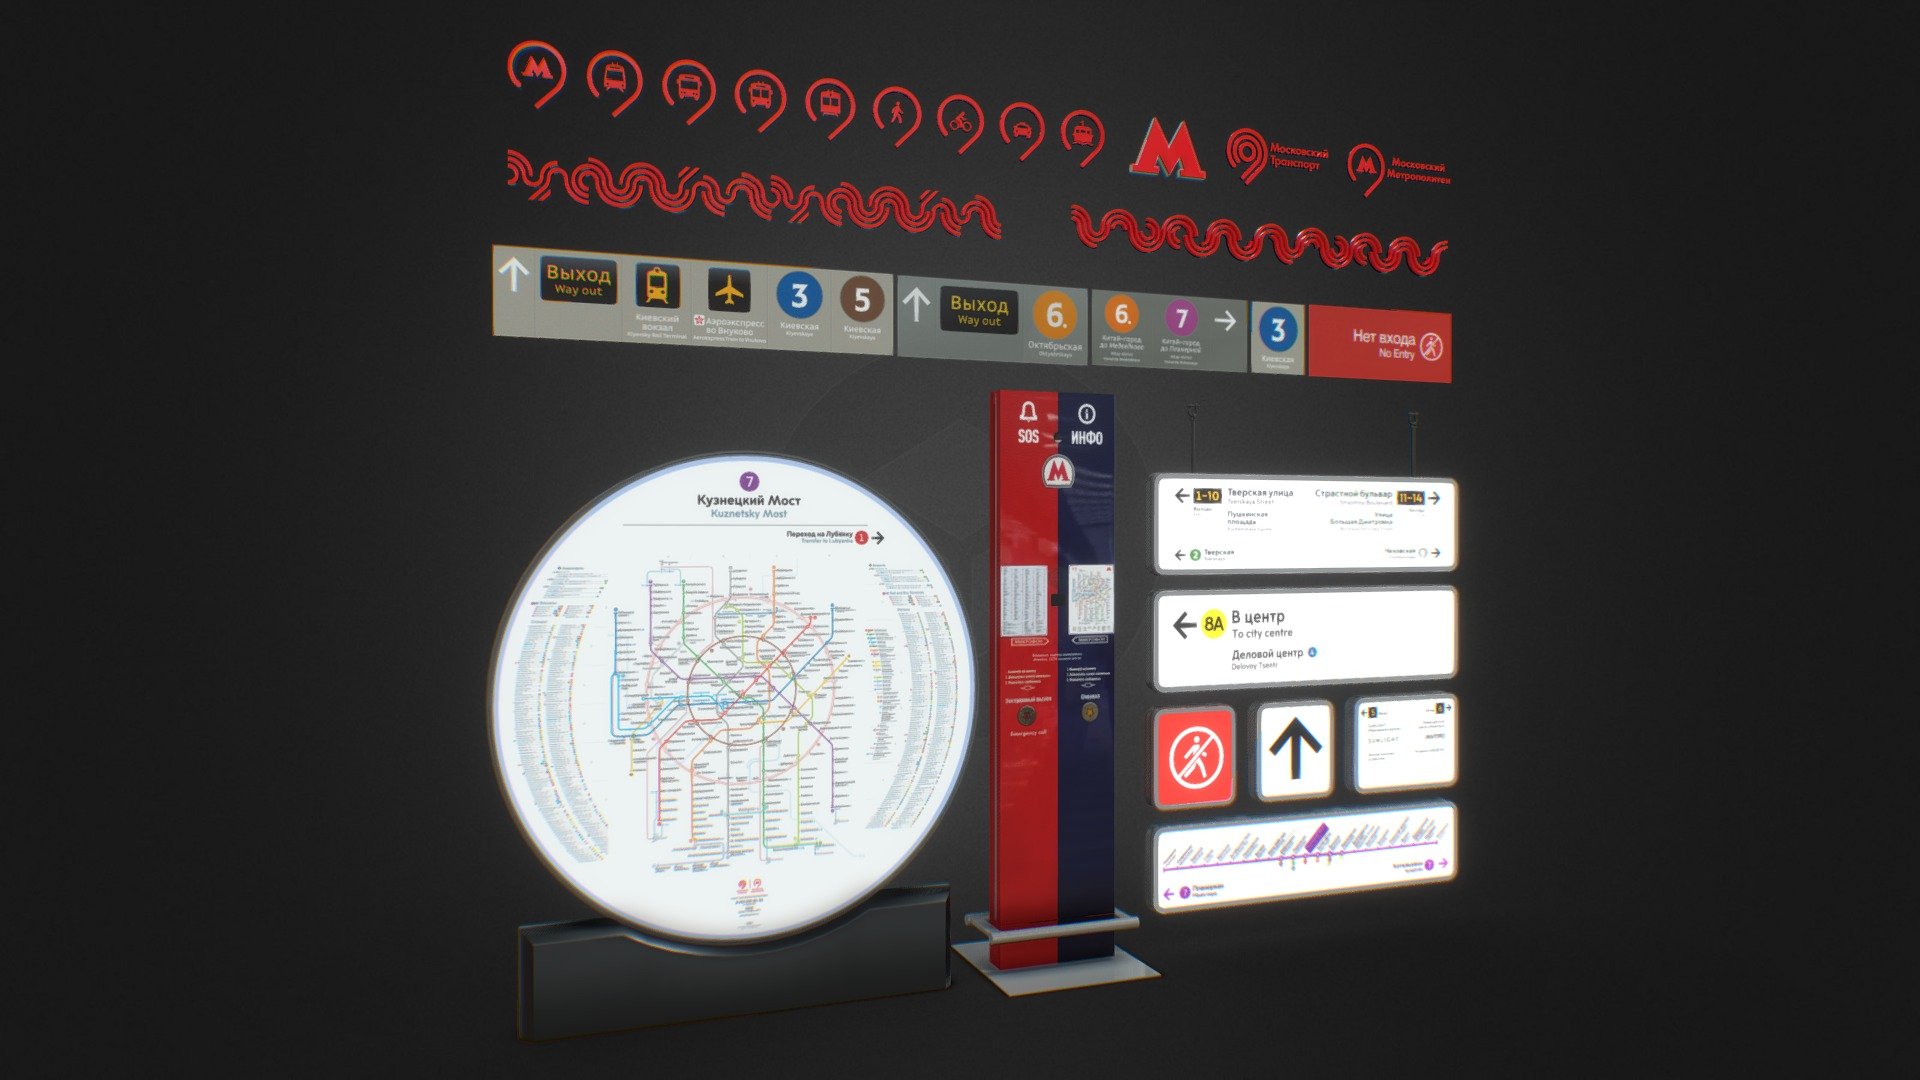 Moscow metro navigation accessories, maps, informations stands, pointers, infographics, ads, logos - Metro Navigation - Buy Royalty Free 3D model by CG max (@cgmax) 3d model